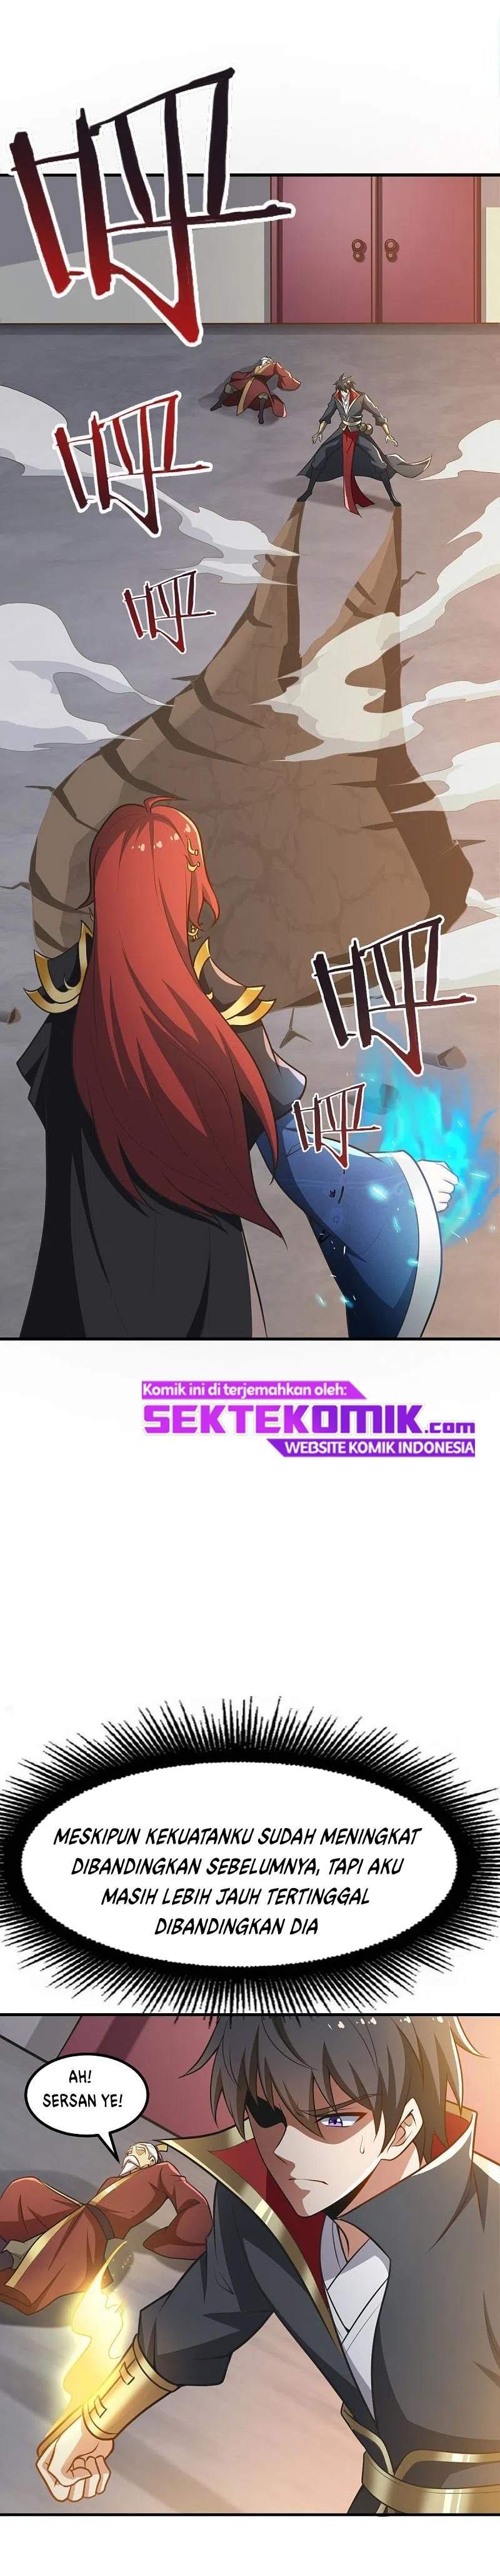 Domination One Sword Chapter 159